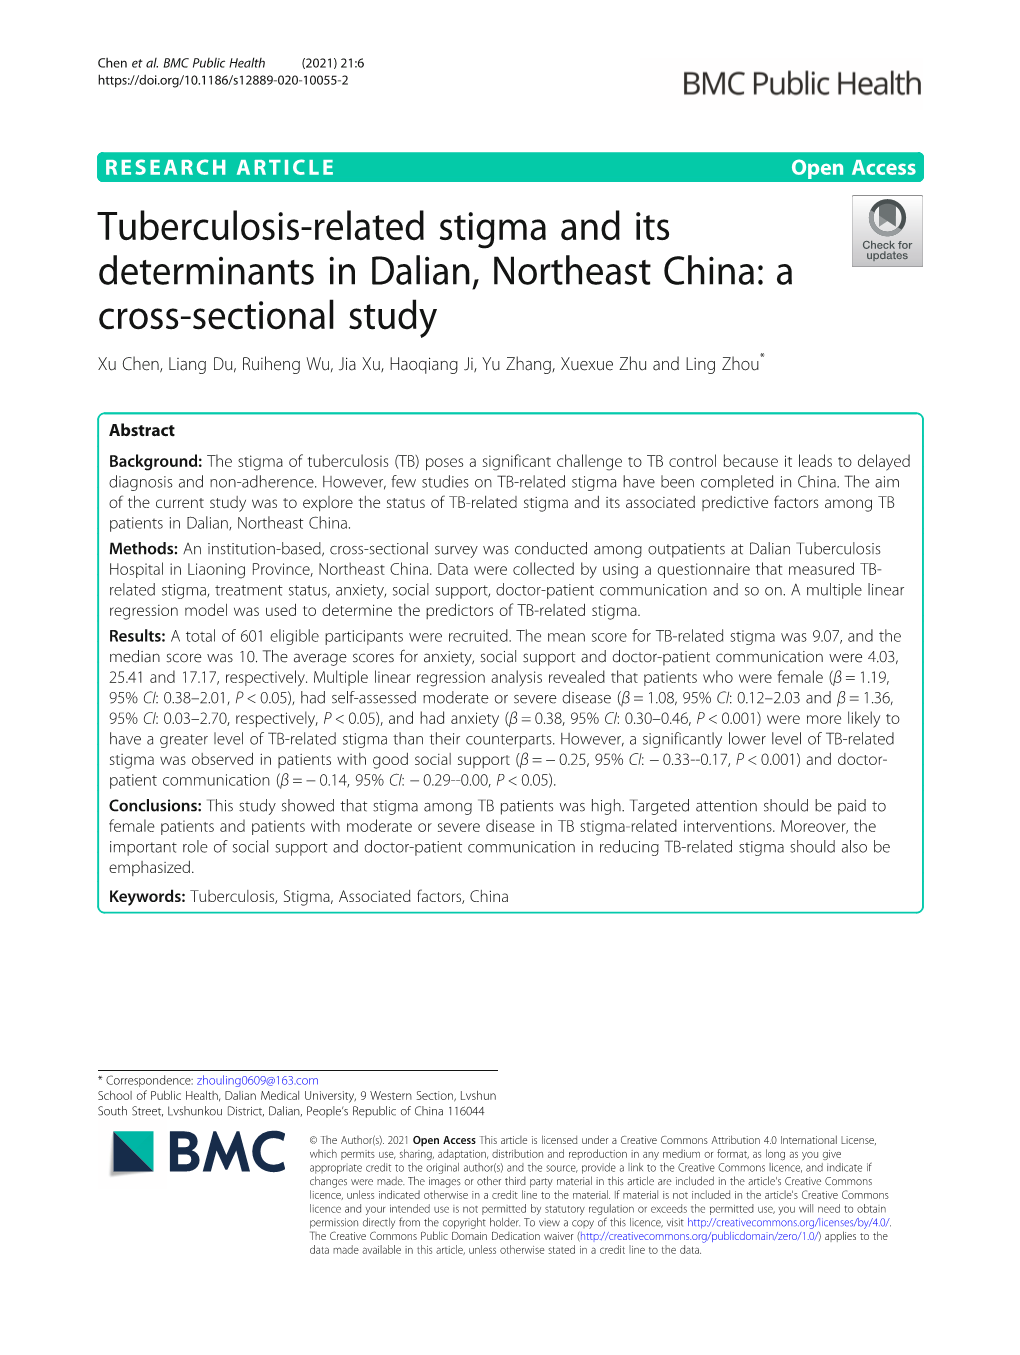 Tuberculosis-Related Stigma and Its Determinants